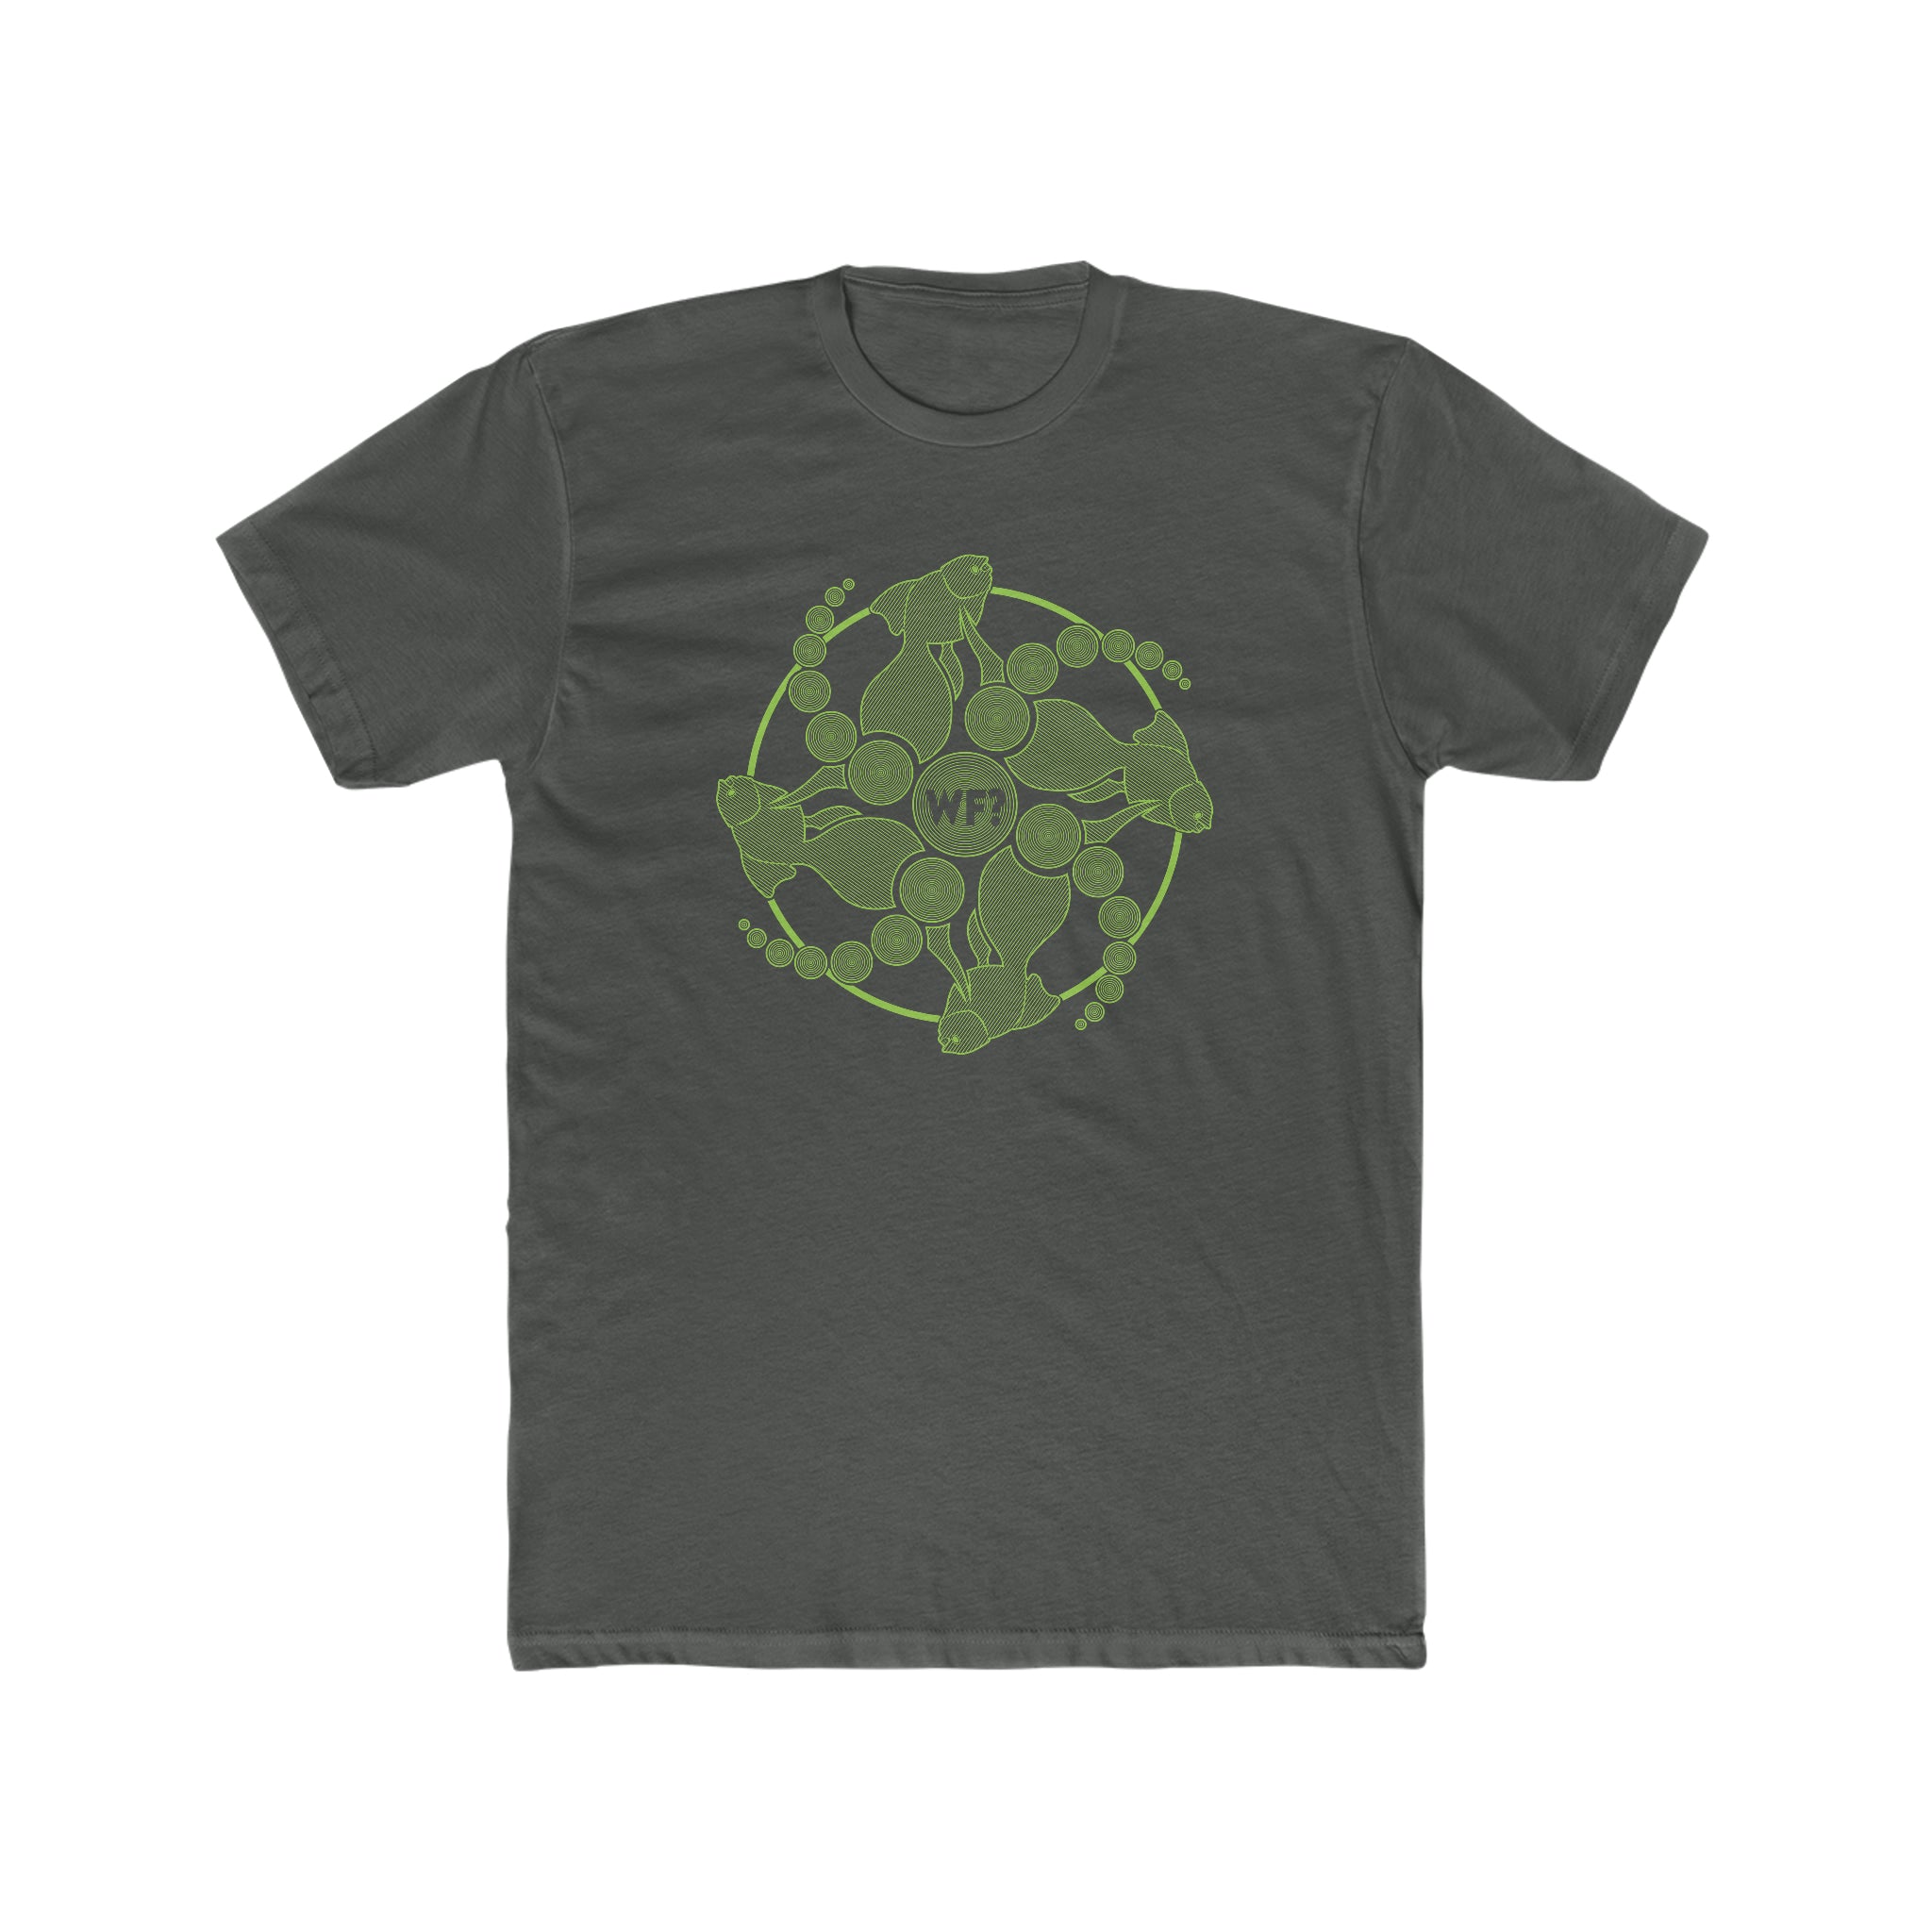 Buy solid-heavy-metal Crop Circles Limited T-Shirt